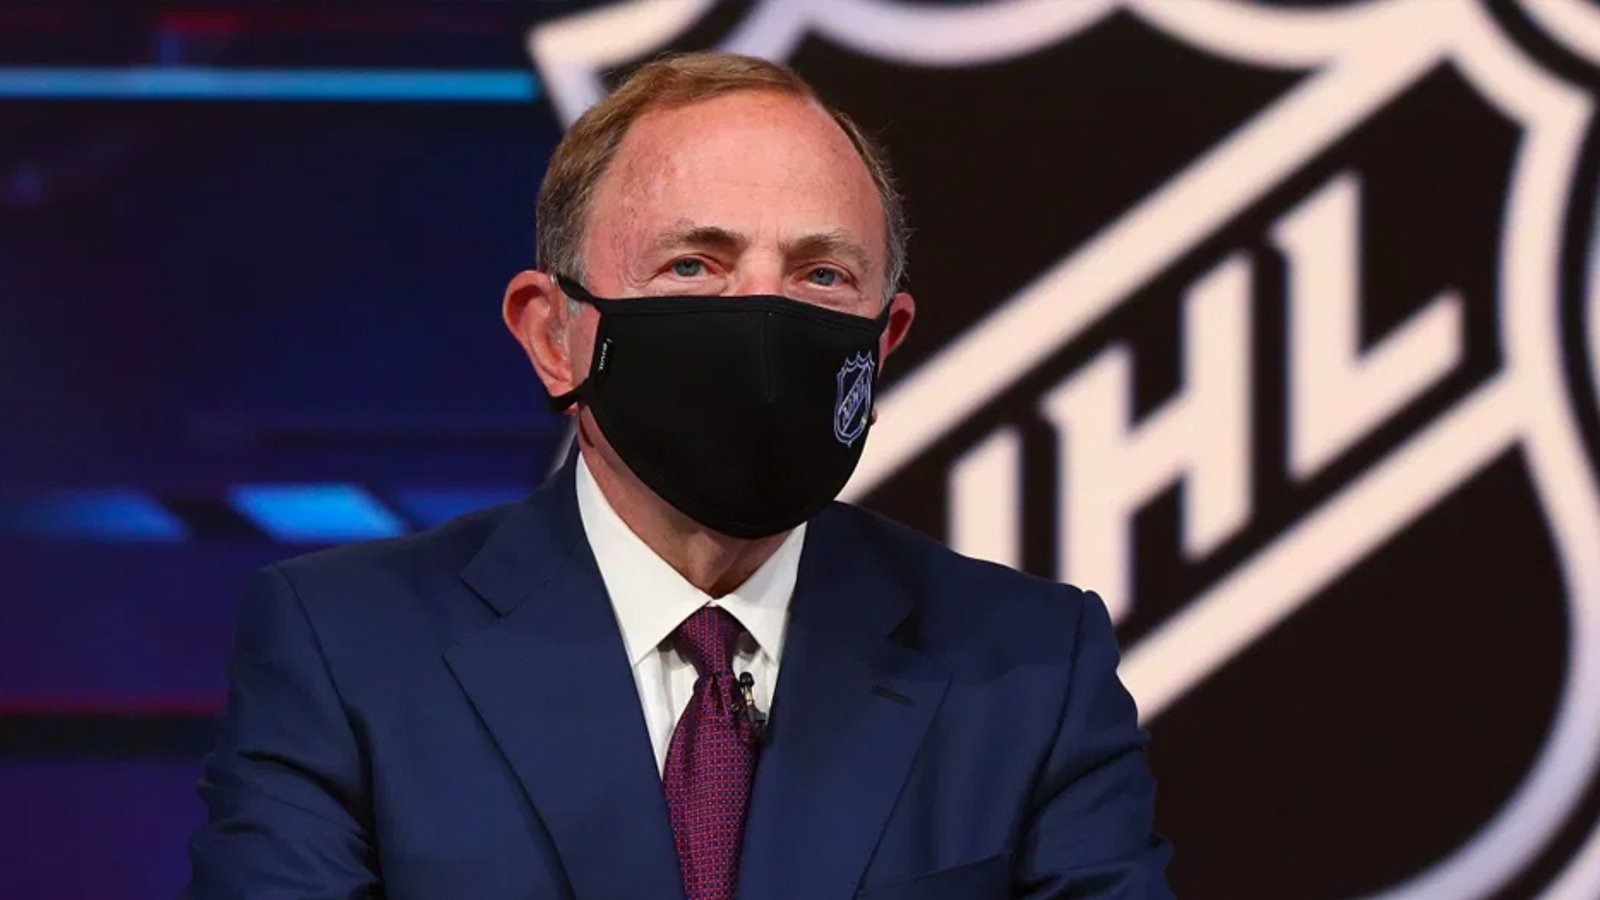 Report: Players “angry and betrayed” at the NHL over salary demands